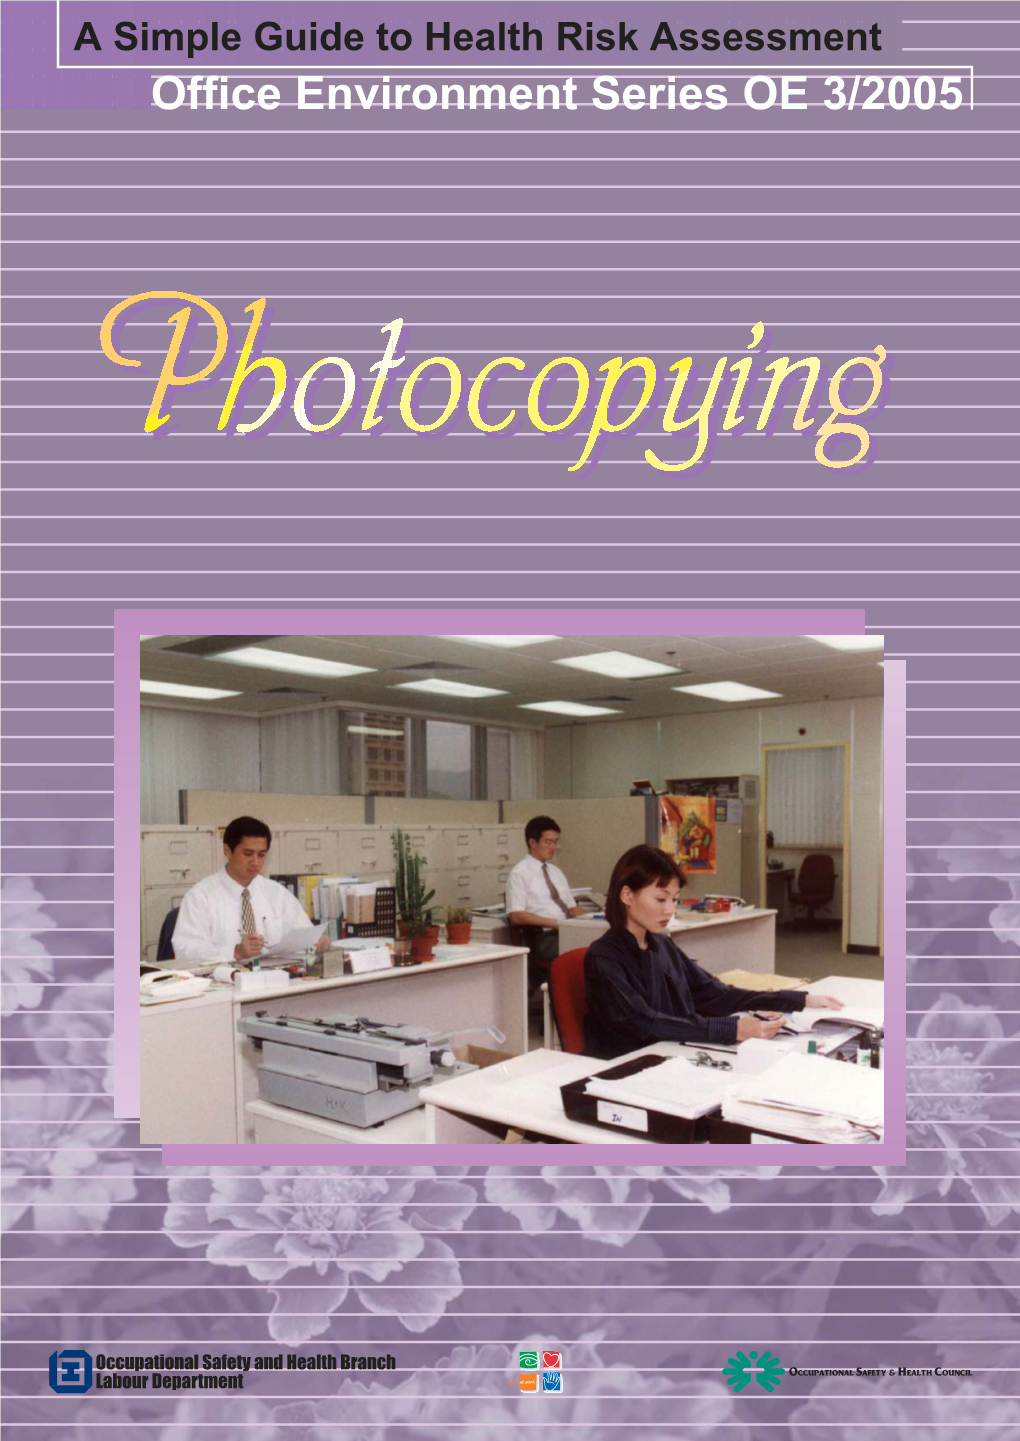 Photocopying in Their Workplace